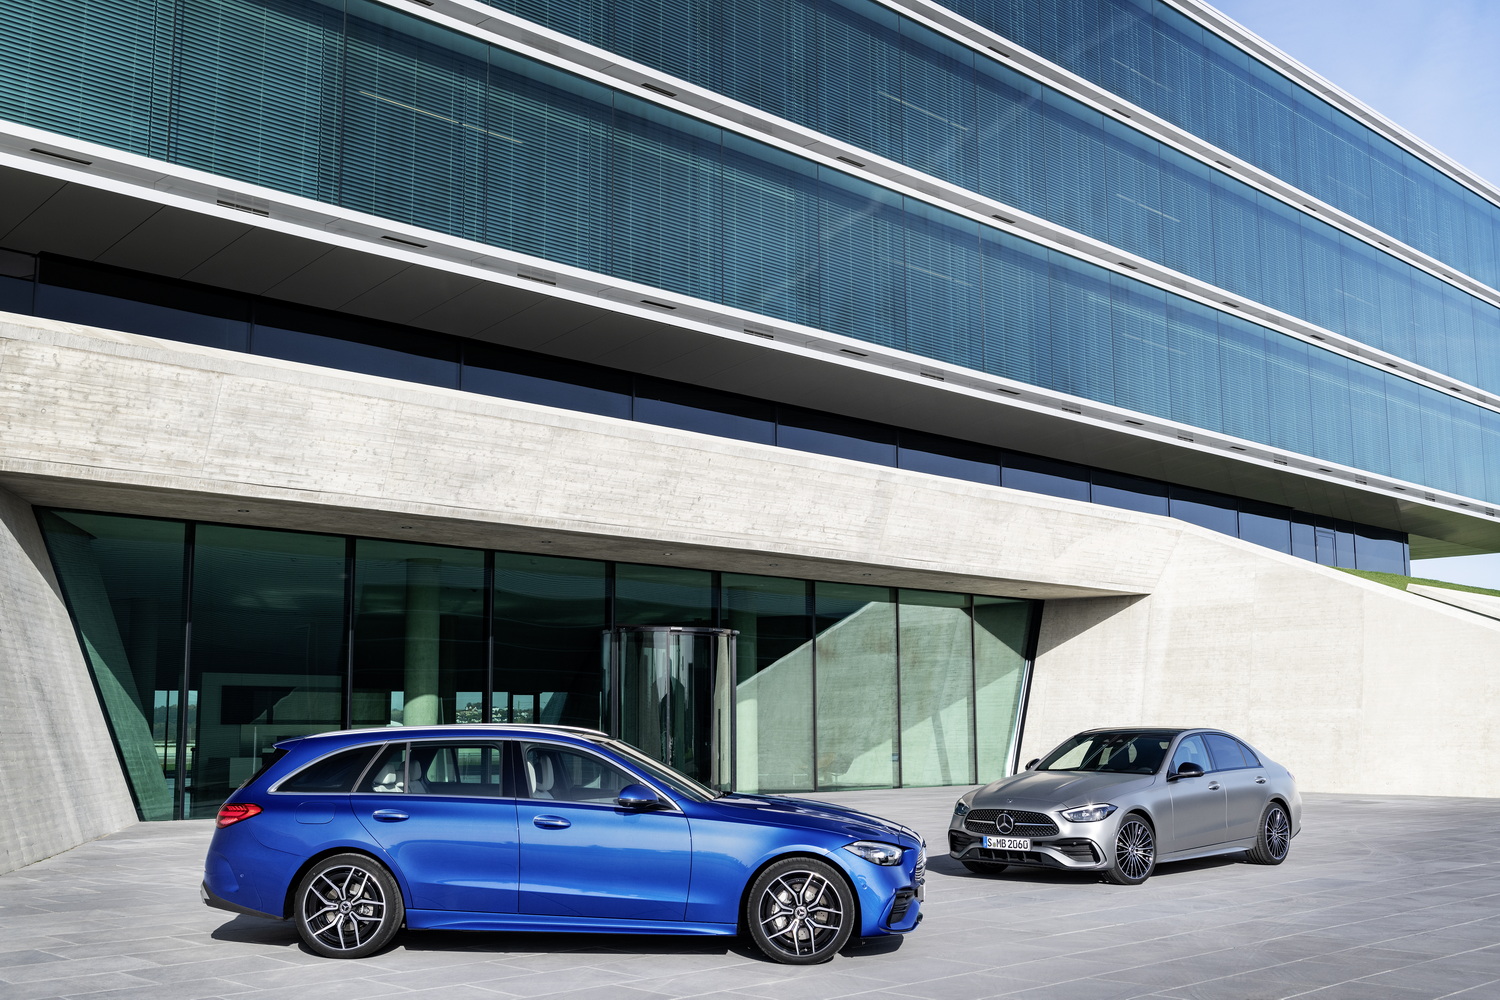 Wraps come off new Mercedes C-Class. Image by Mercedes AG.